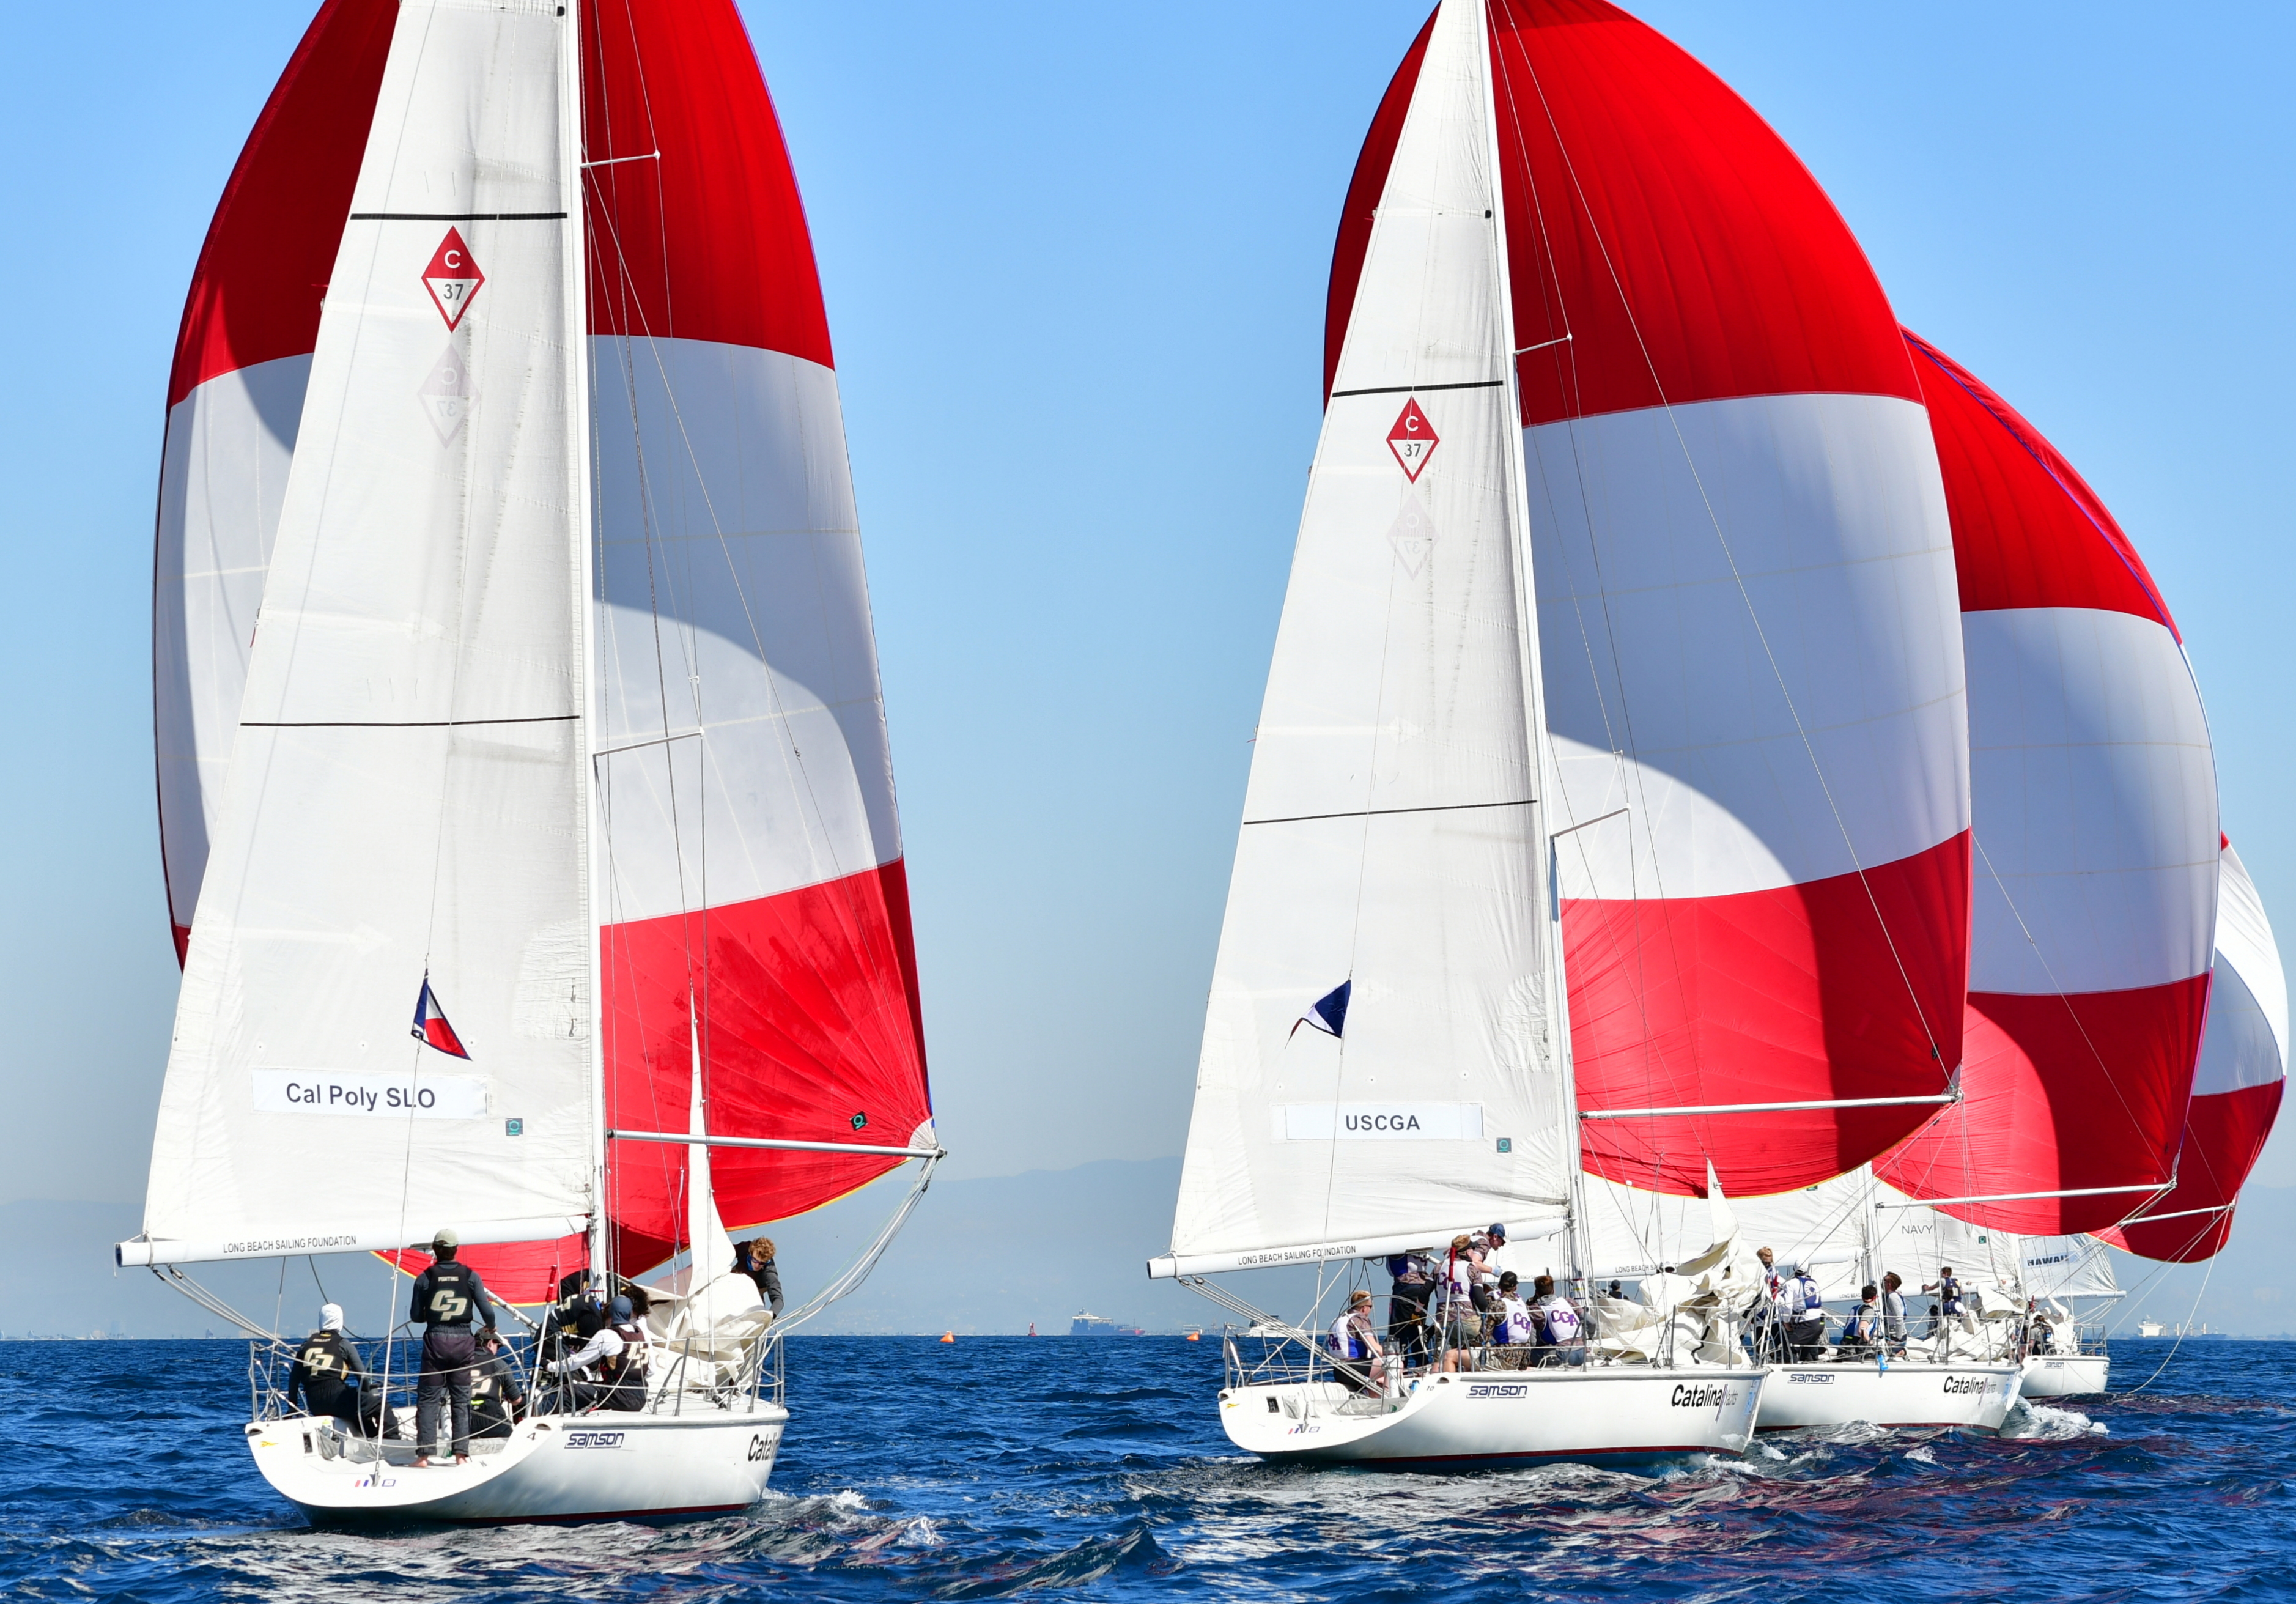 The Cal Poly Sailing Club's boat sailed next to the U.S. Coast Guard Academy's boat during a race on the ocean. Both boats are displaying red-and-white sails.